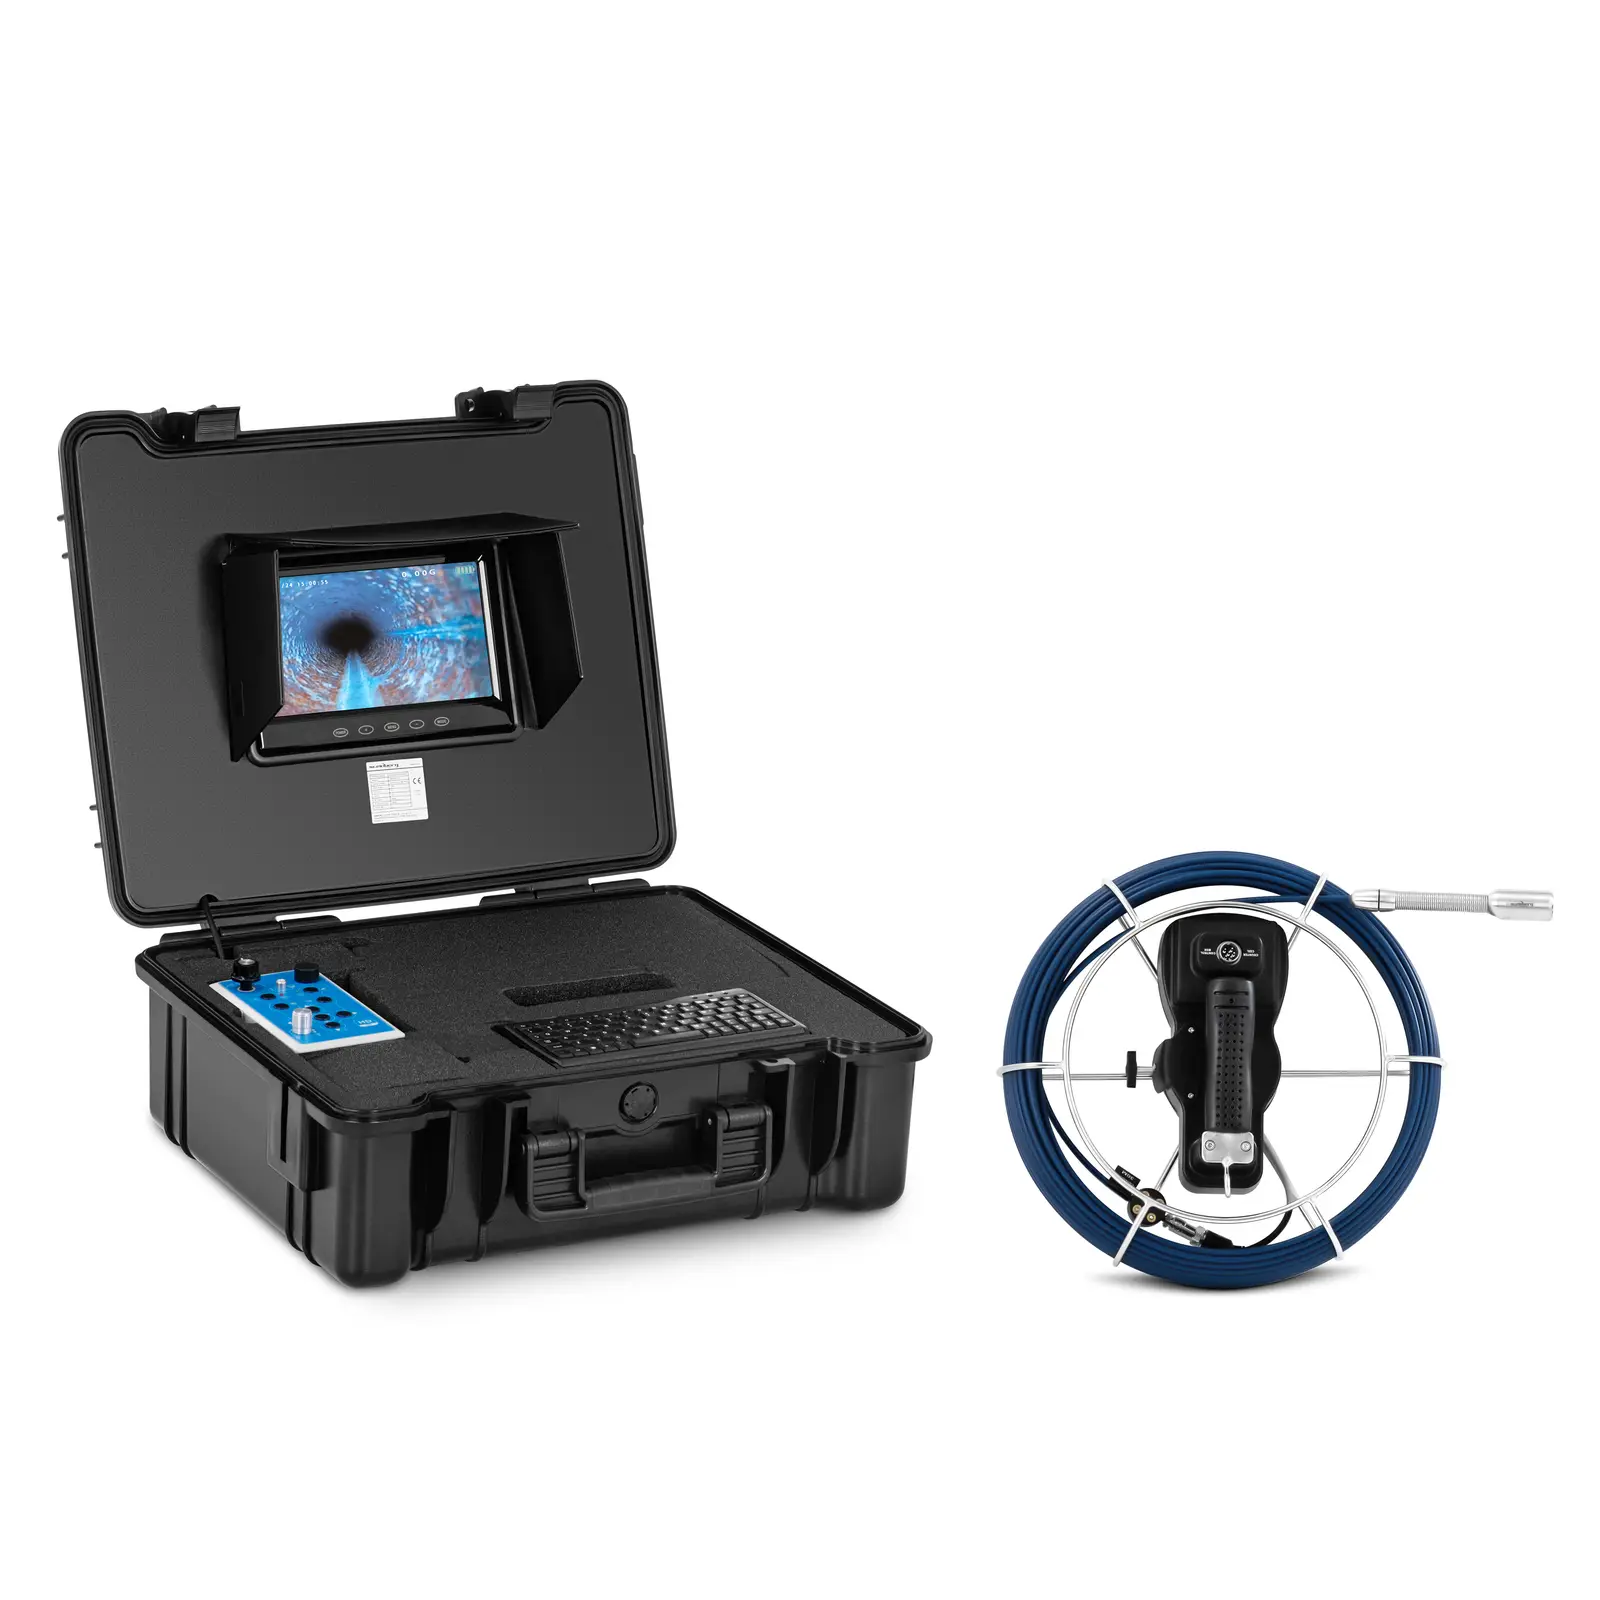 Endoscope Camera 30 m 12 Leds 7" TFT Colour Touch Display - Endoscopes Inspection Cameras by Steinberg Systems